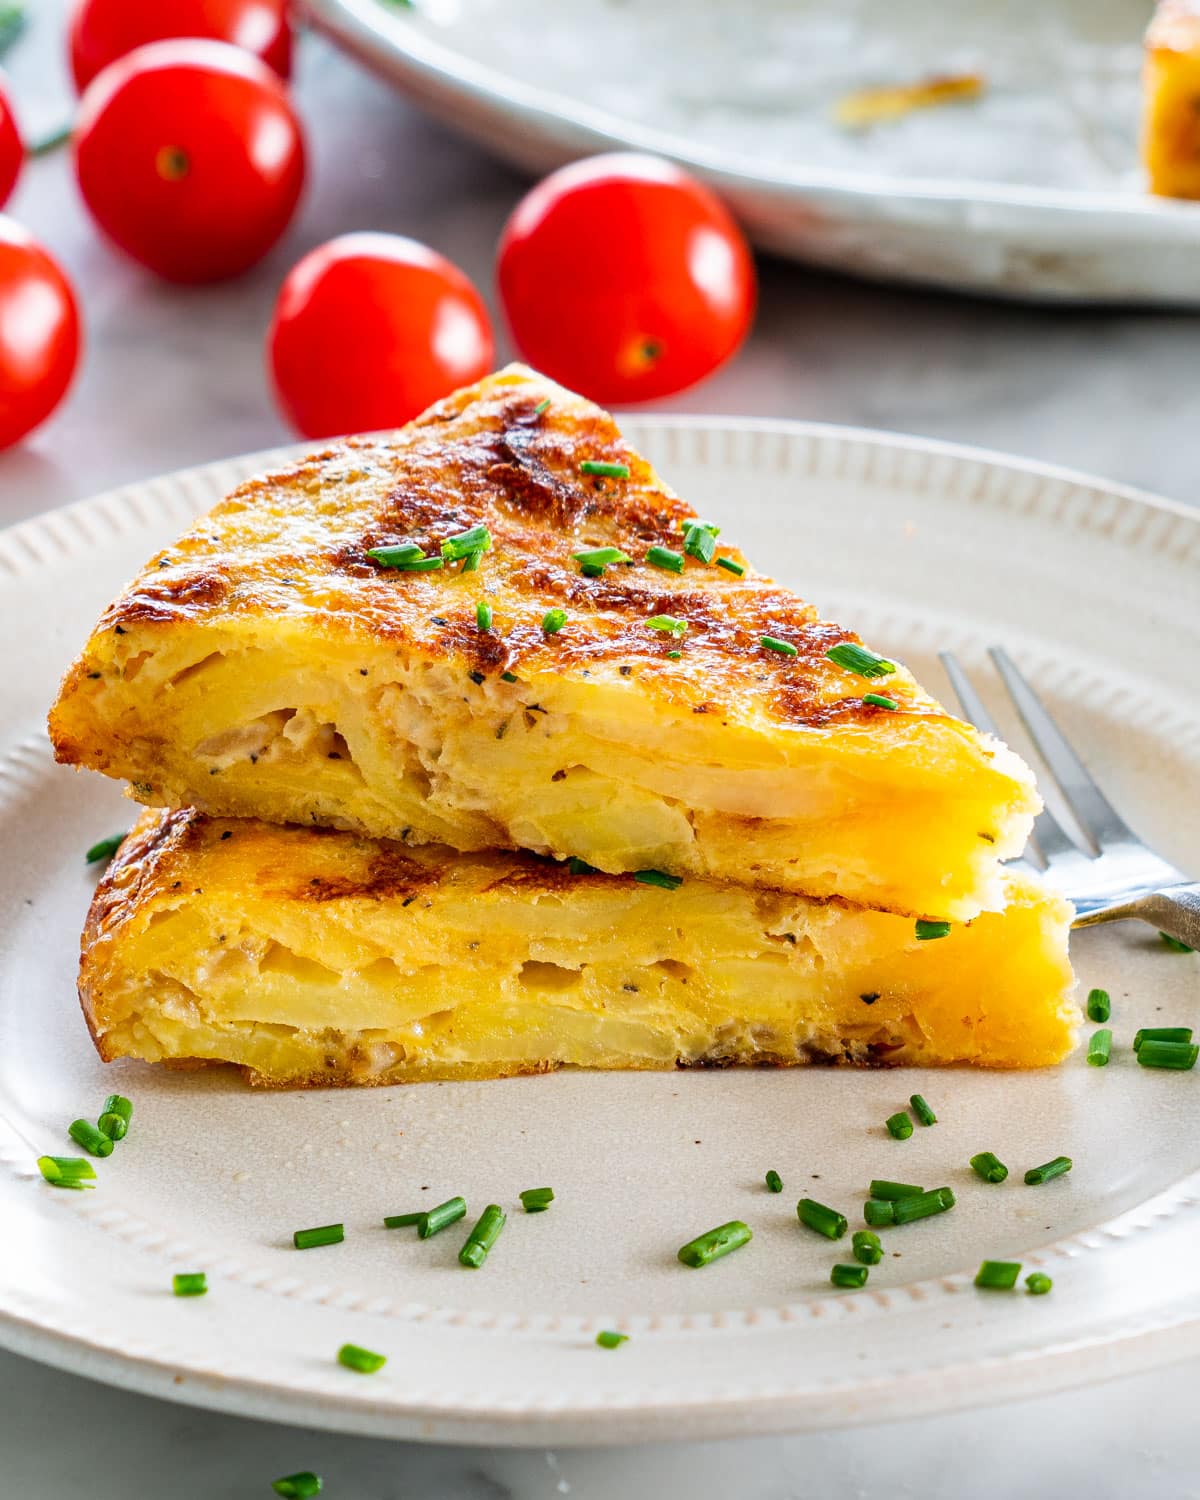 two slices of Spanish tortilla stacked on top of each other on a beige plate garnished with chives